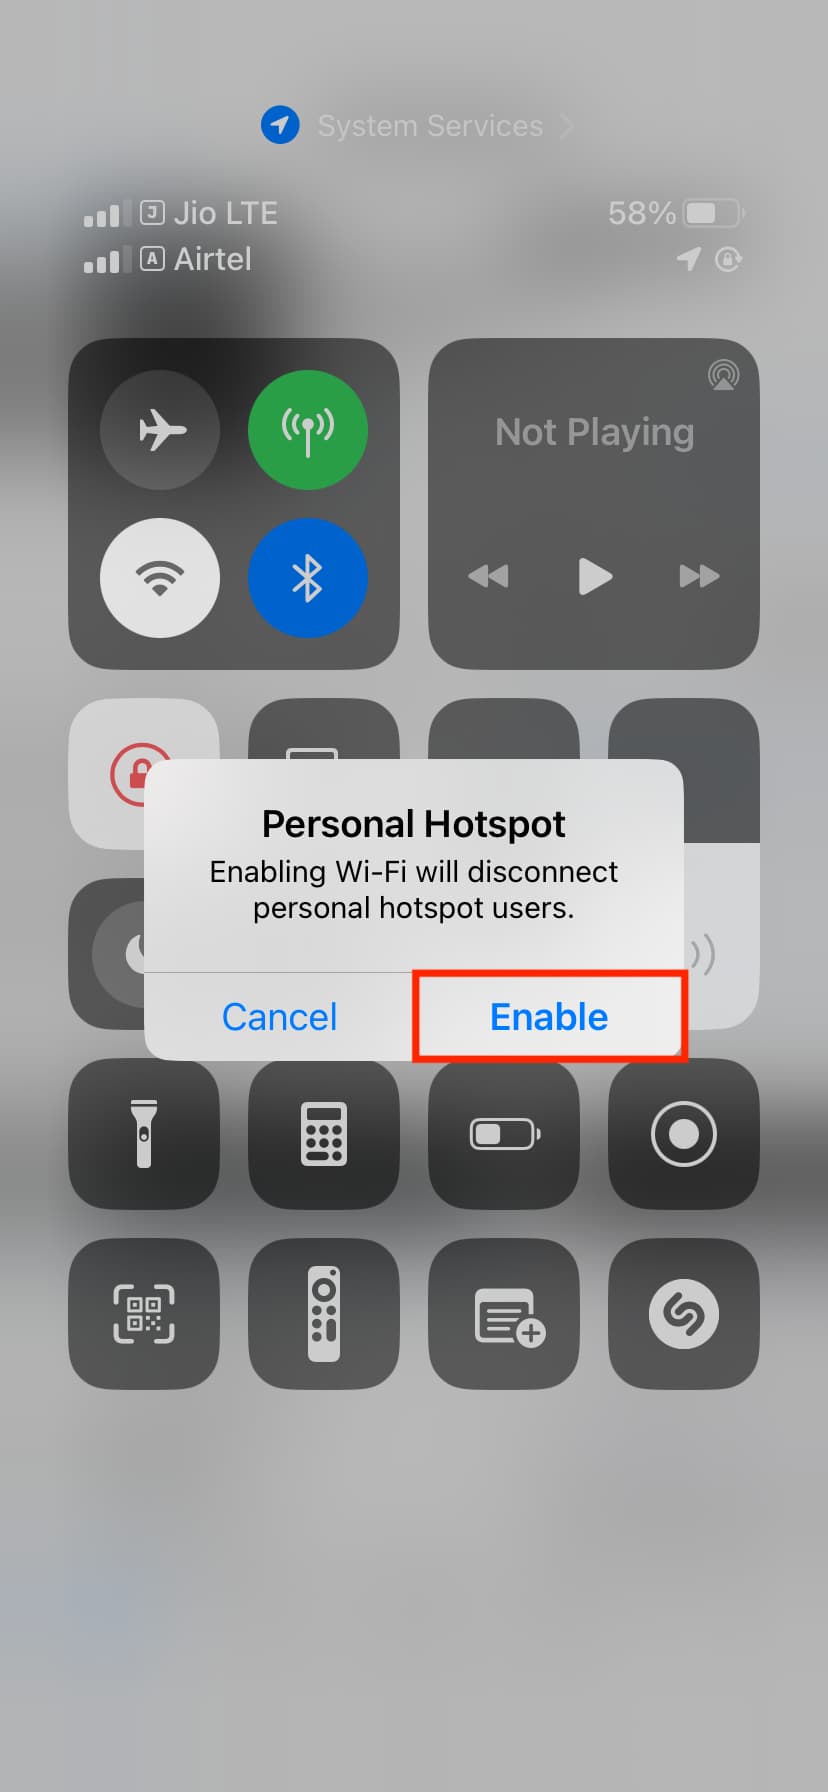 Enabling Wi-Fi will disconnect personal hotspot users alert on iPhone